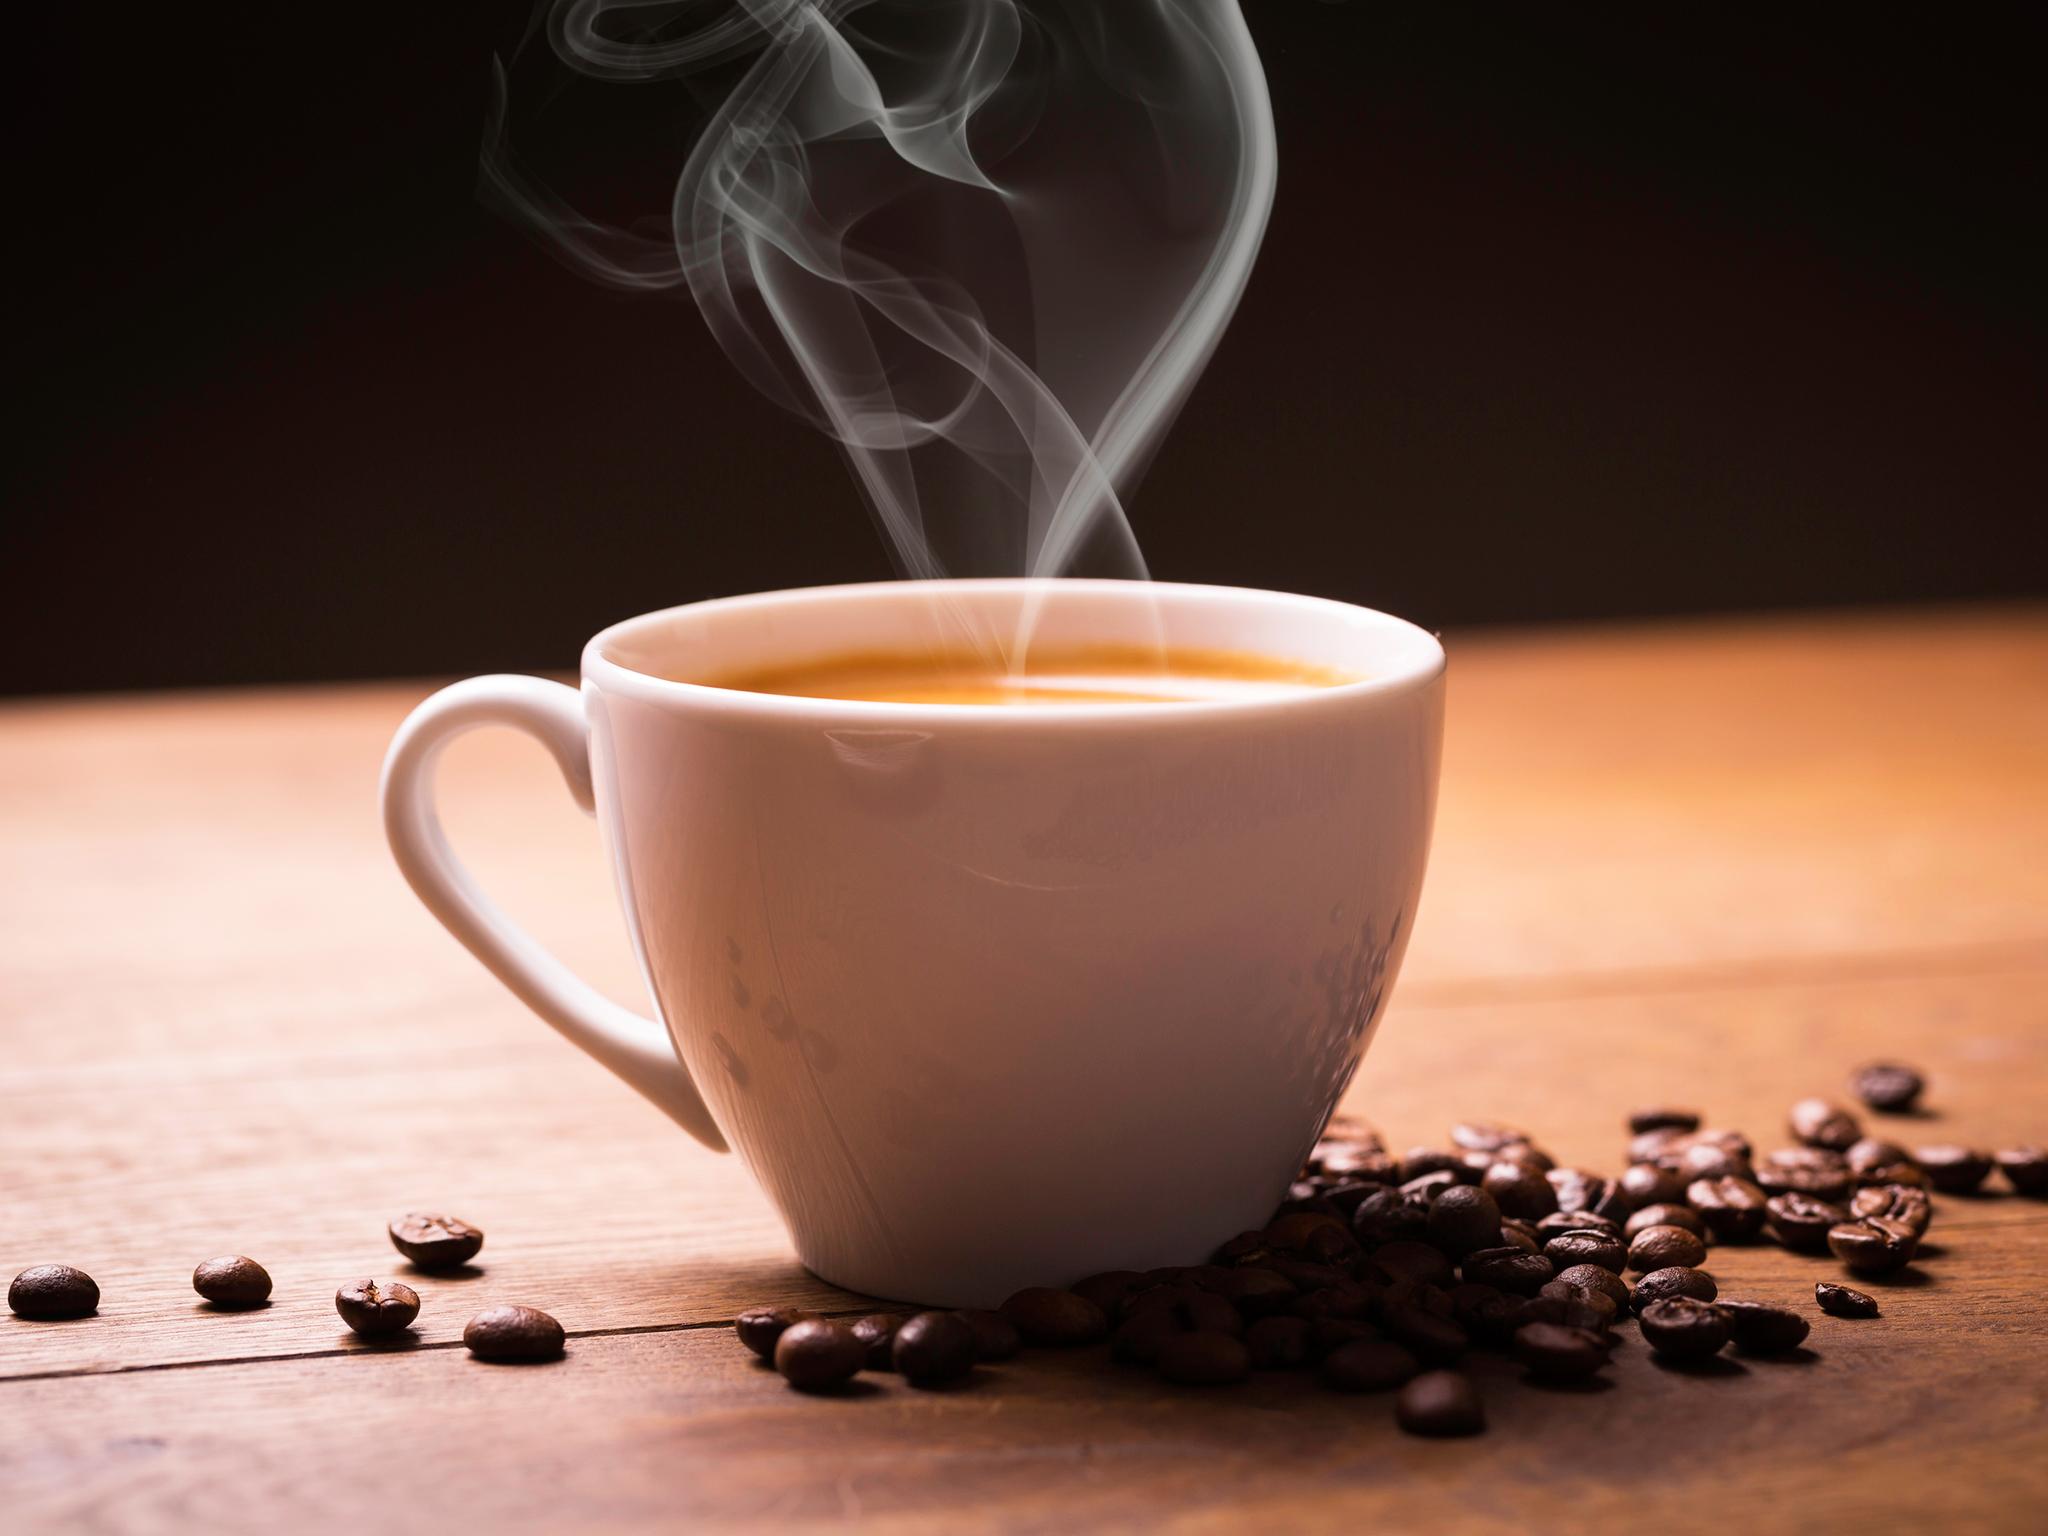 three coffees a day linked to more health than harm study